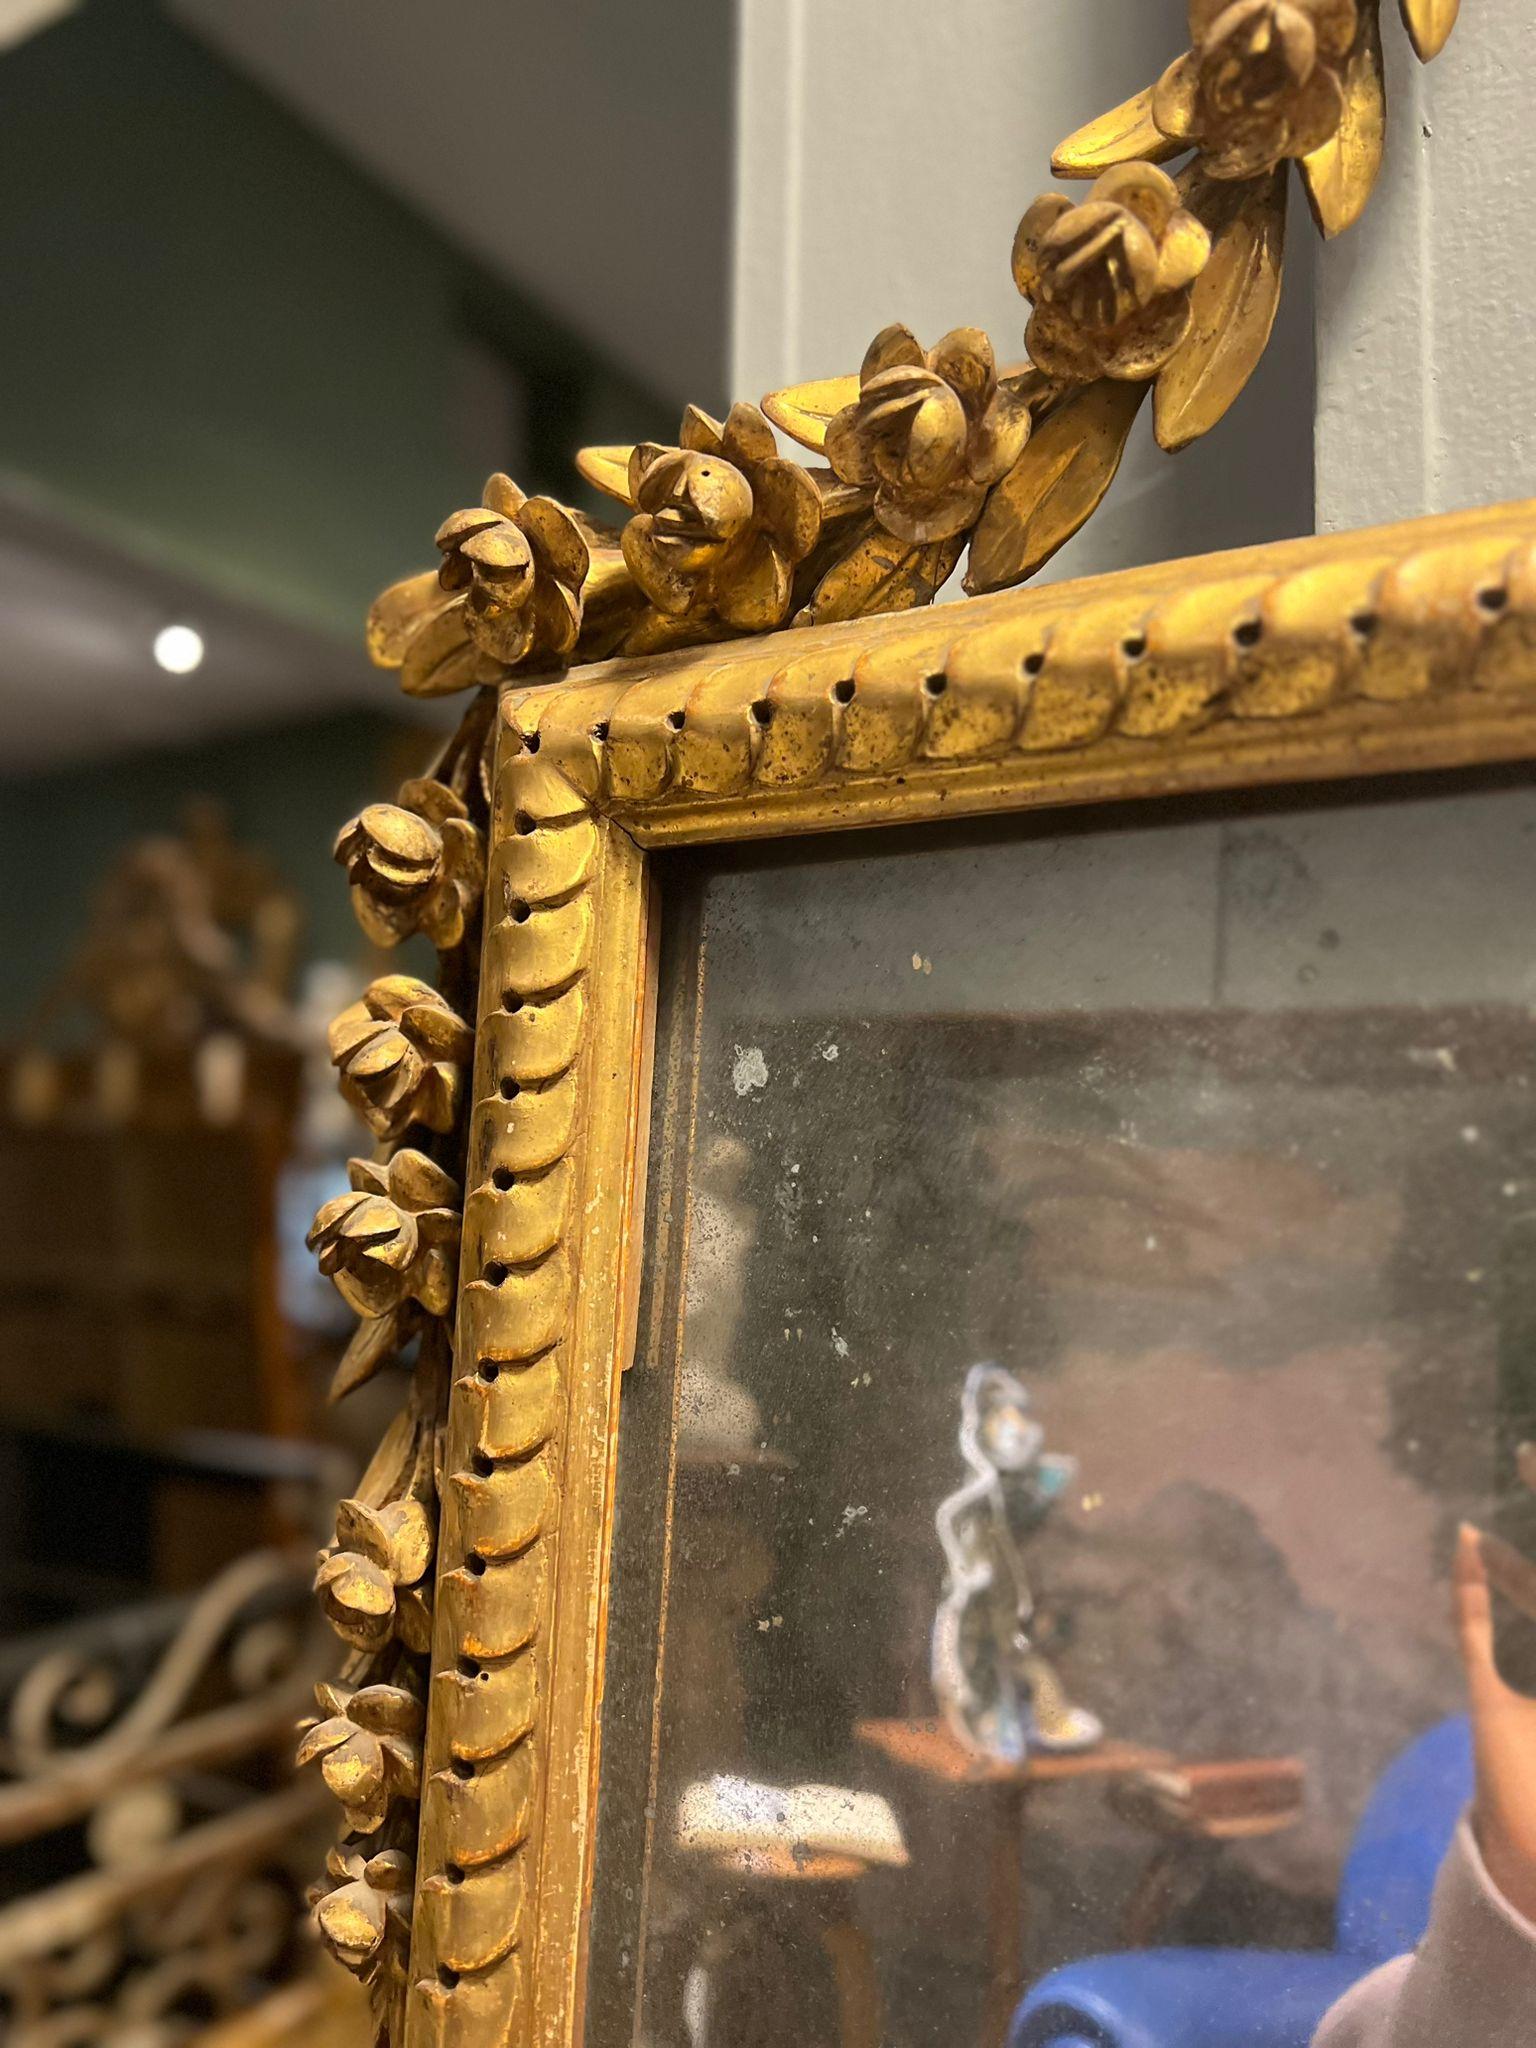 Beautiful Louis XVI mirror in carved and gilded wood.

Extremely refined is the cymatium, which is richly carved in the form of a flower vase from which cords extend laterally. 

Of fine quality are the carvings and gilding. Also nice is the